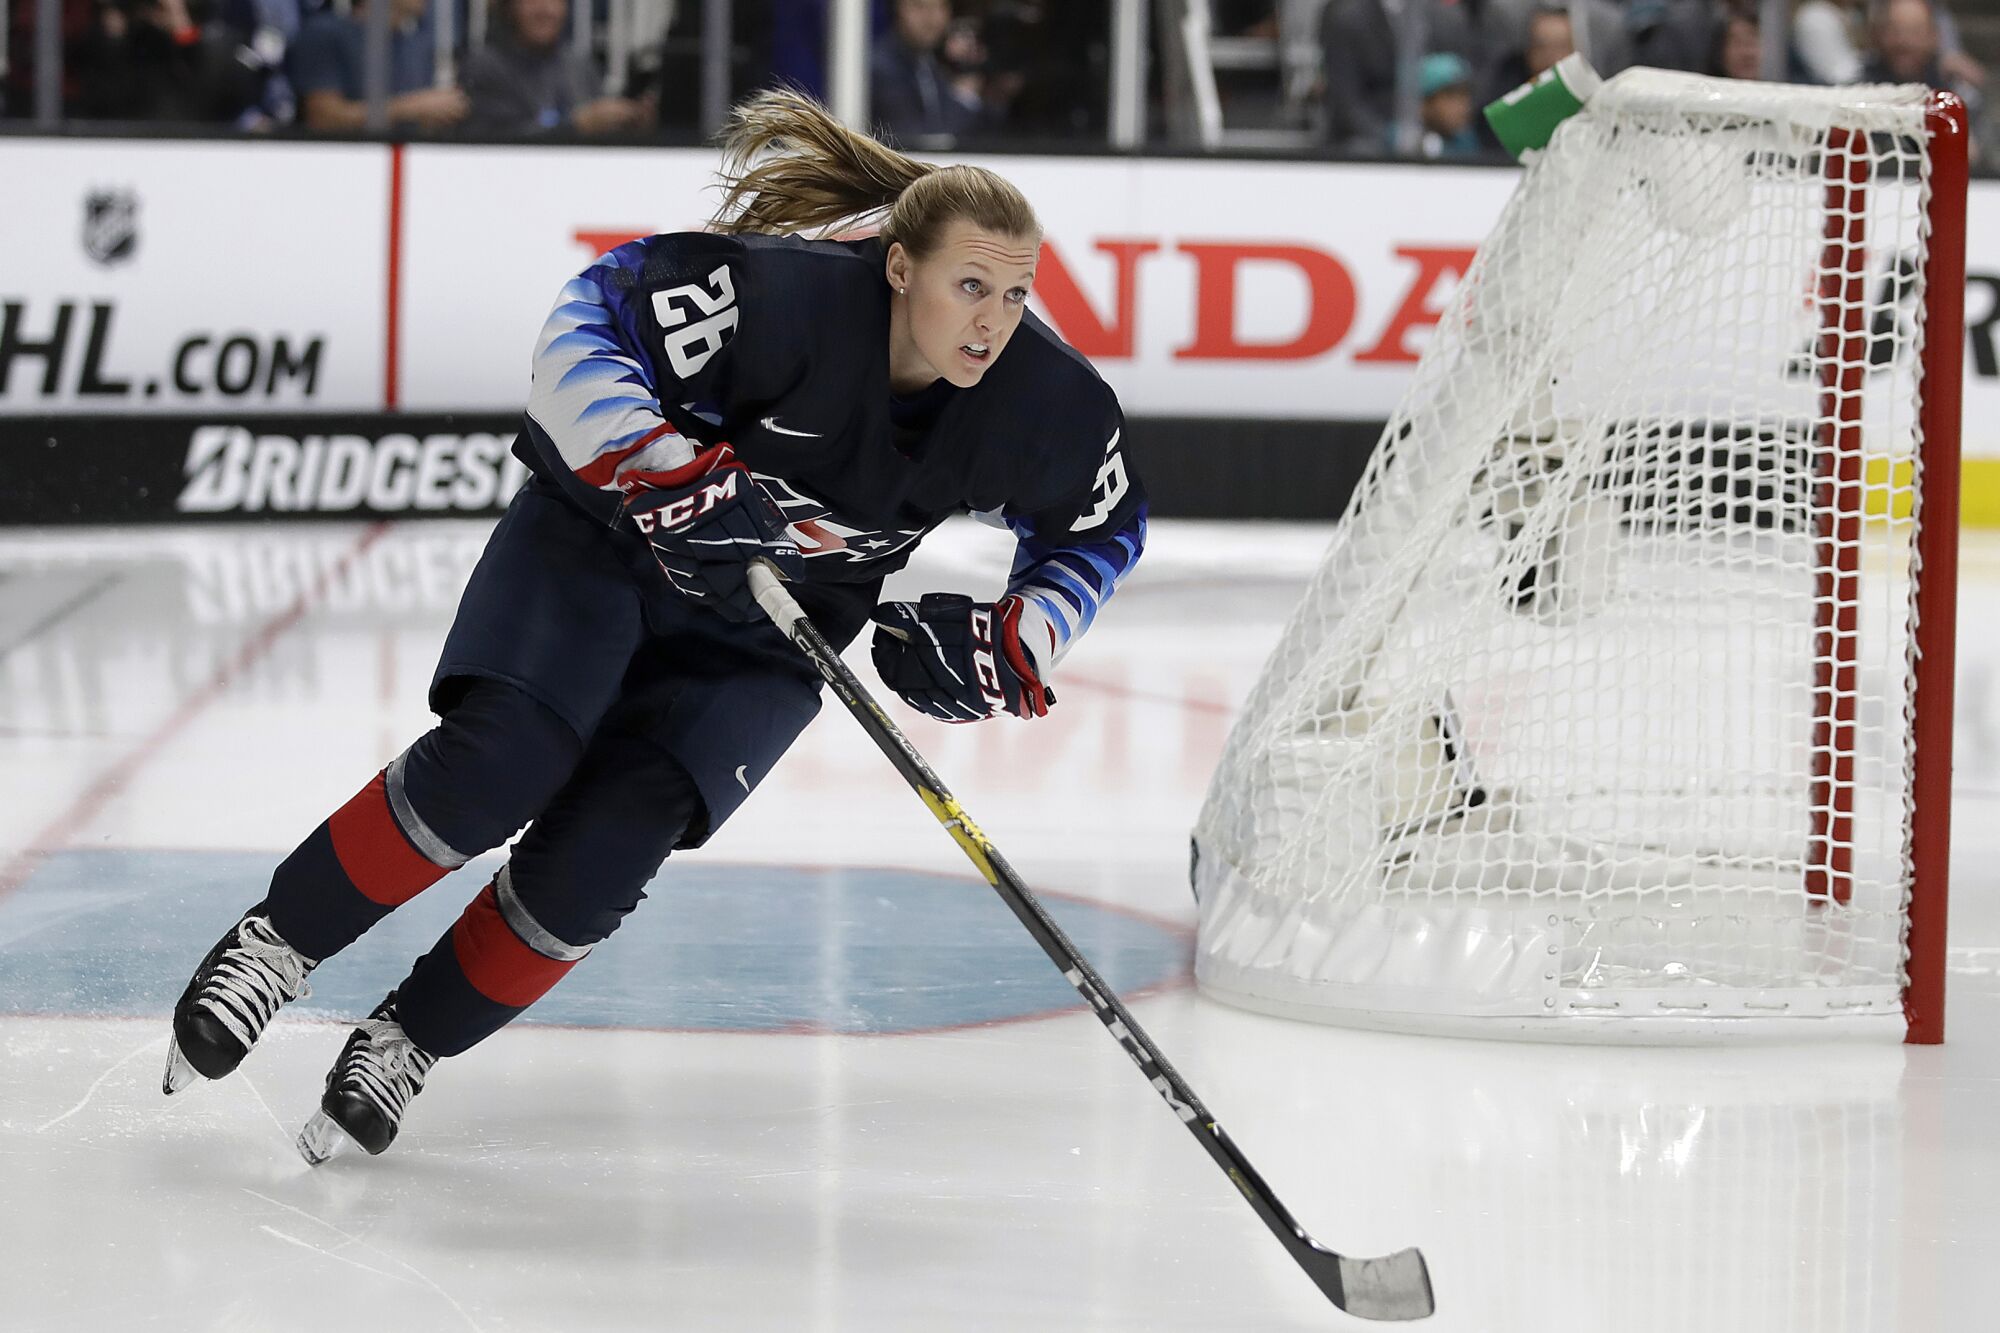 Kendall Coyne Schofield skates during the 2019 NHL Skills Competition.